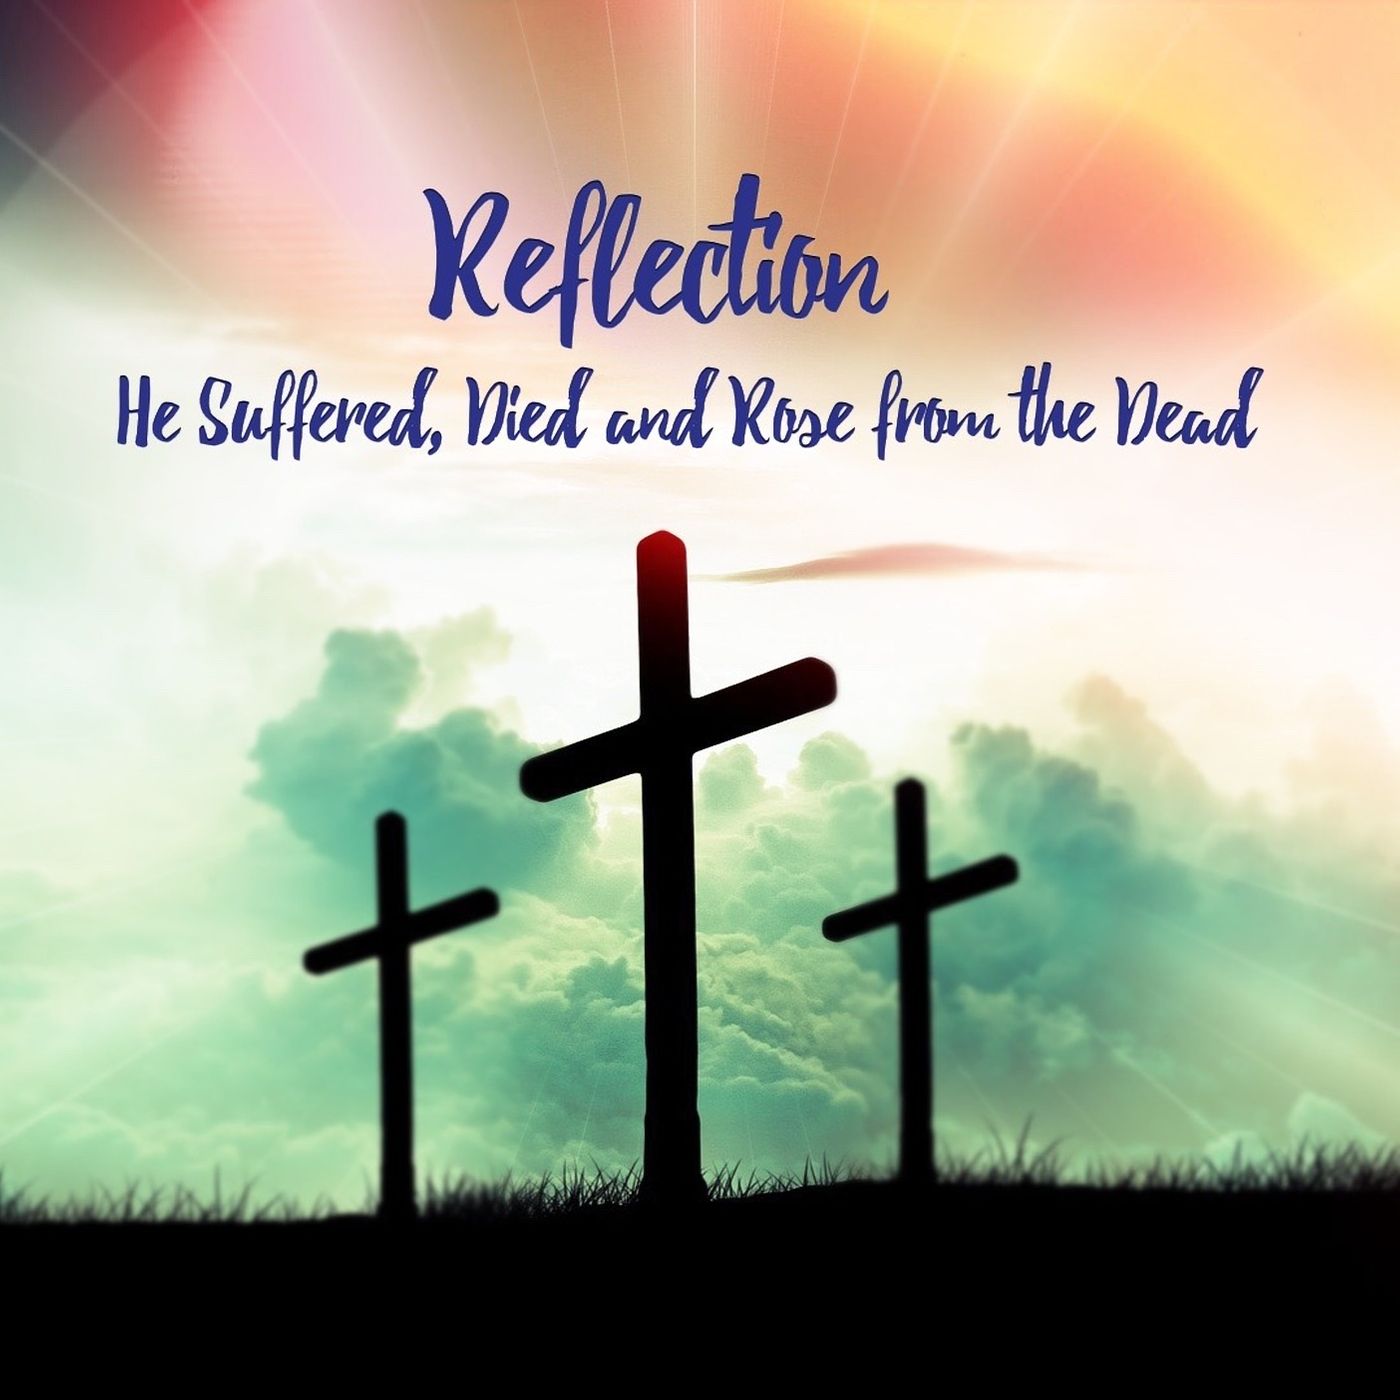 Reflection-He Suffered, Died and Rose from the Dead